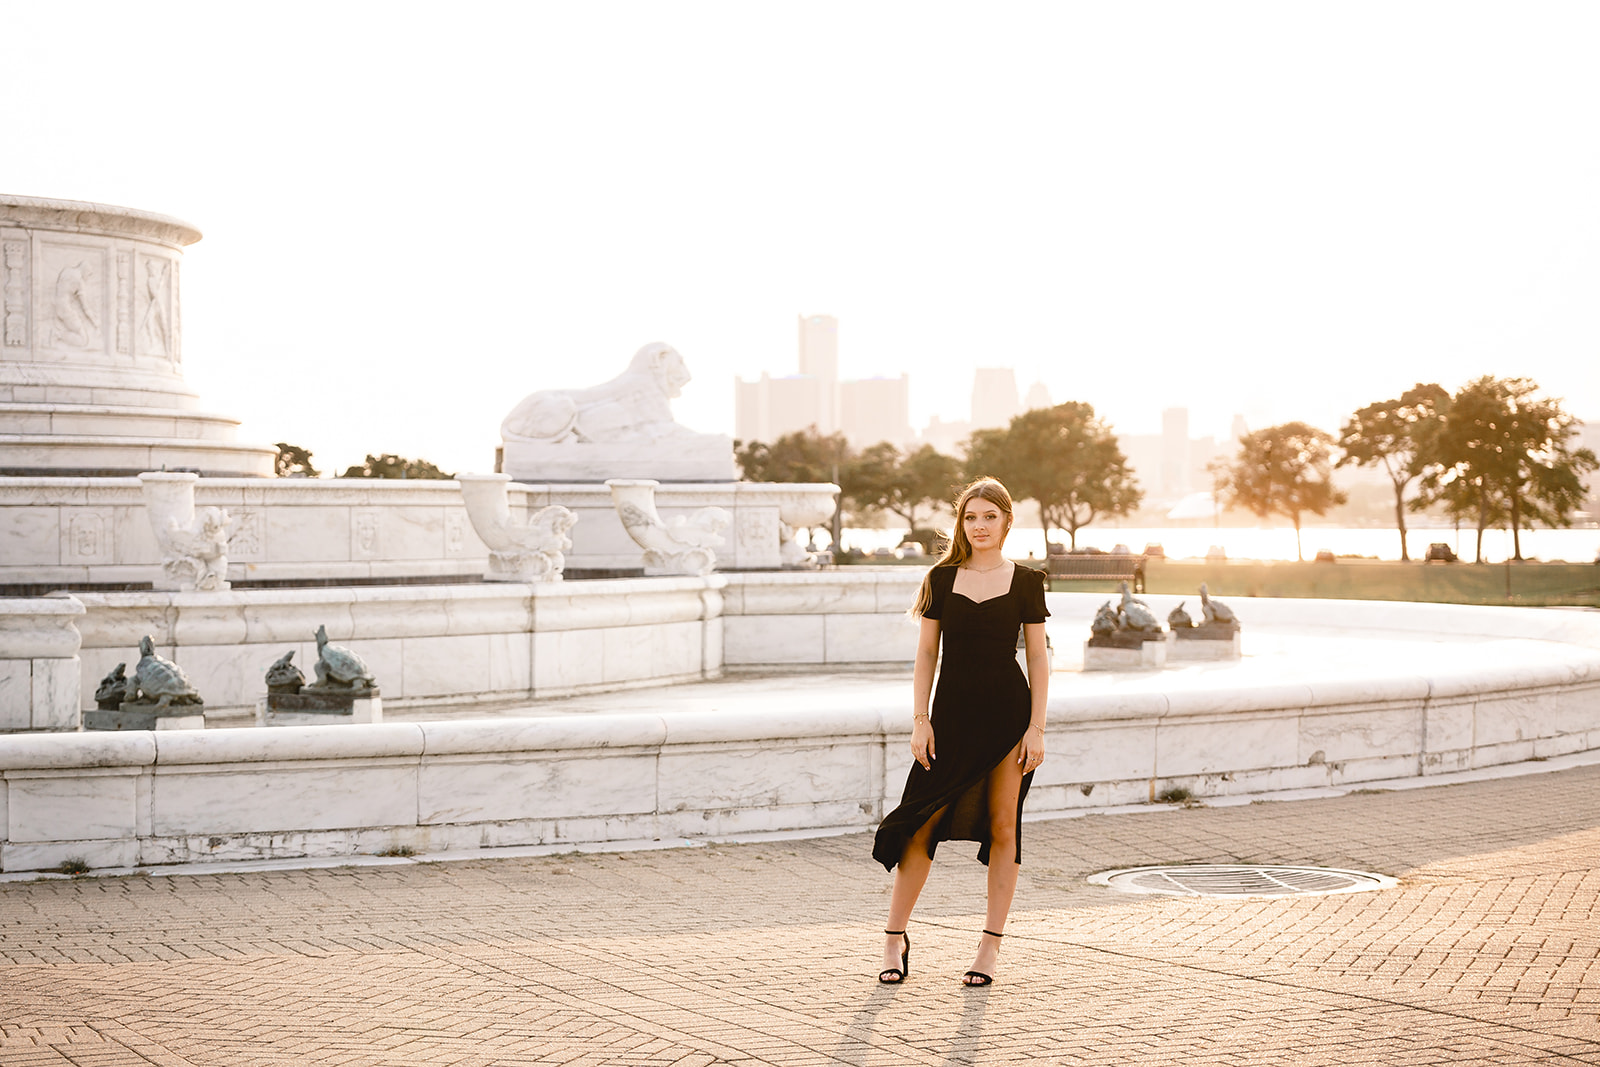 Natalie at the Belle Isle iconic fountain for her senior portrait session